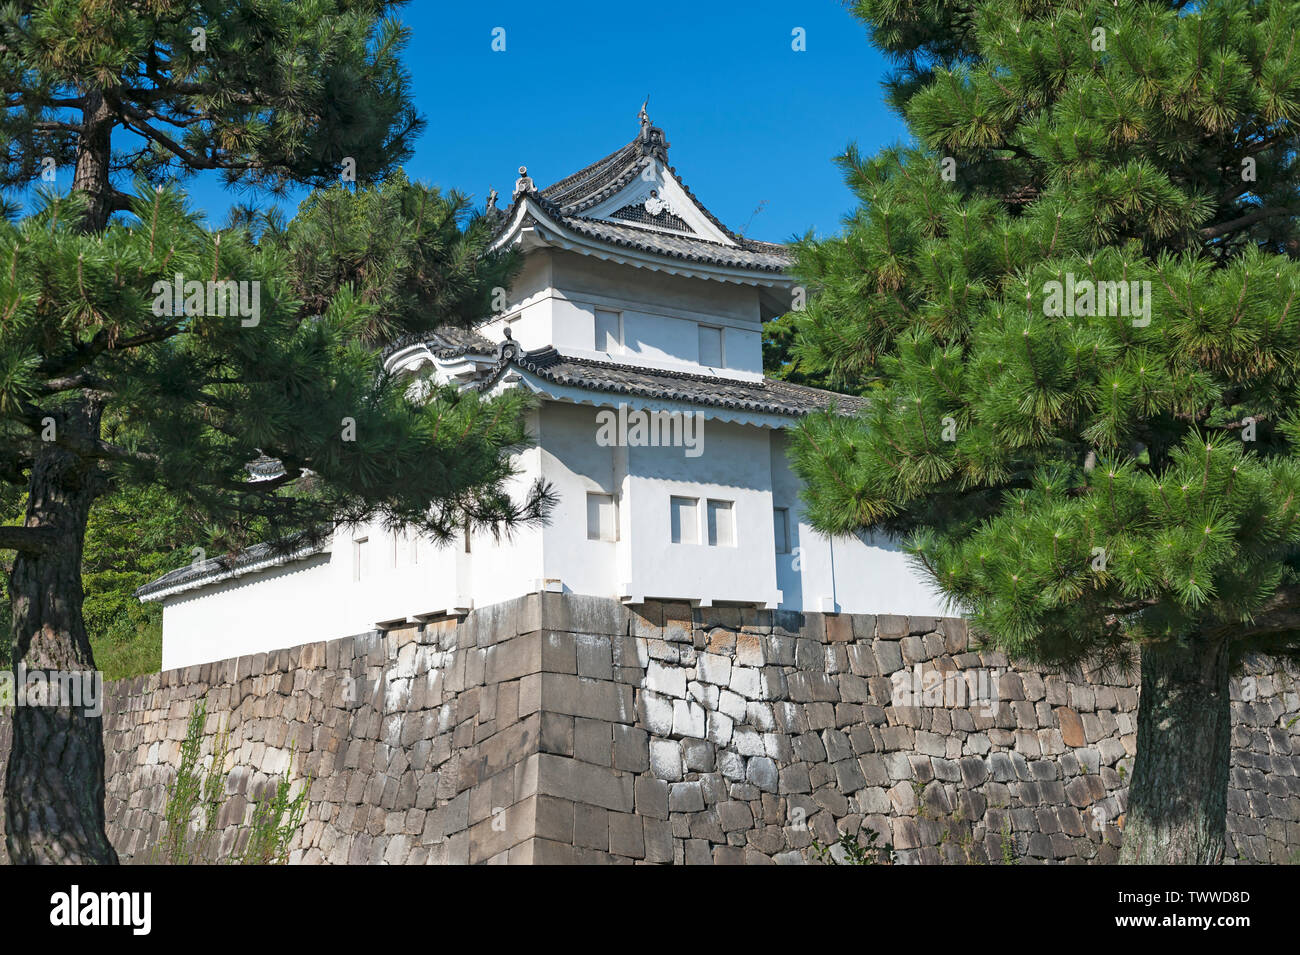 Fortified control wing, look-out building standing on stone wall of moat defending the Nijo Castle grounds, Kyoto, Japan. Stock Photo